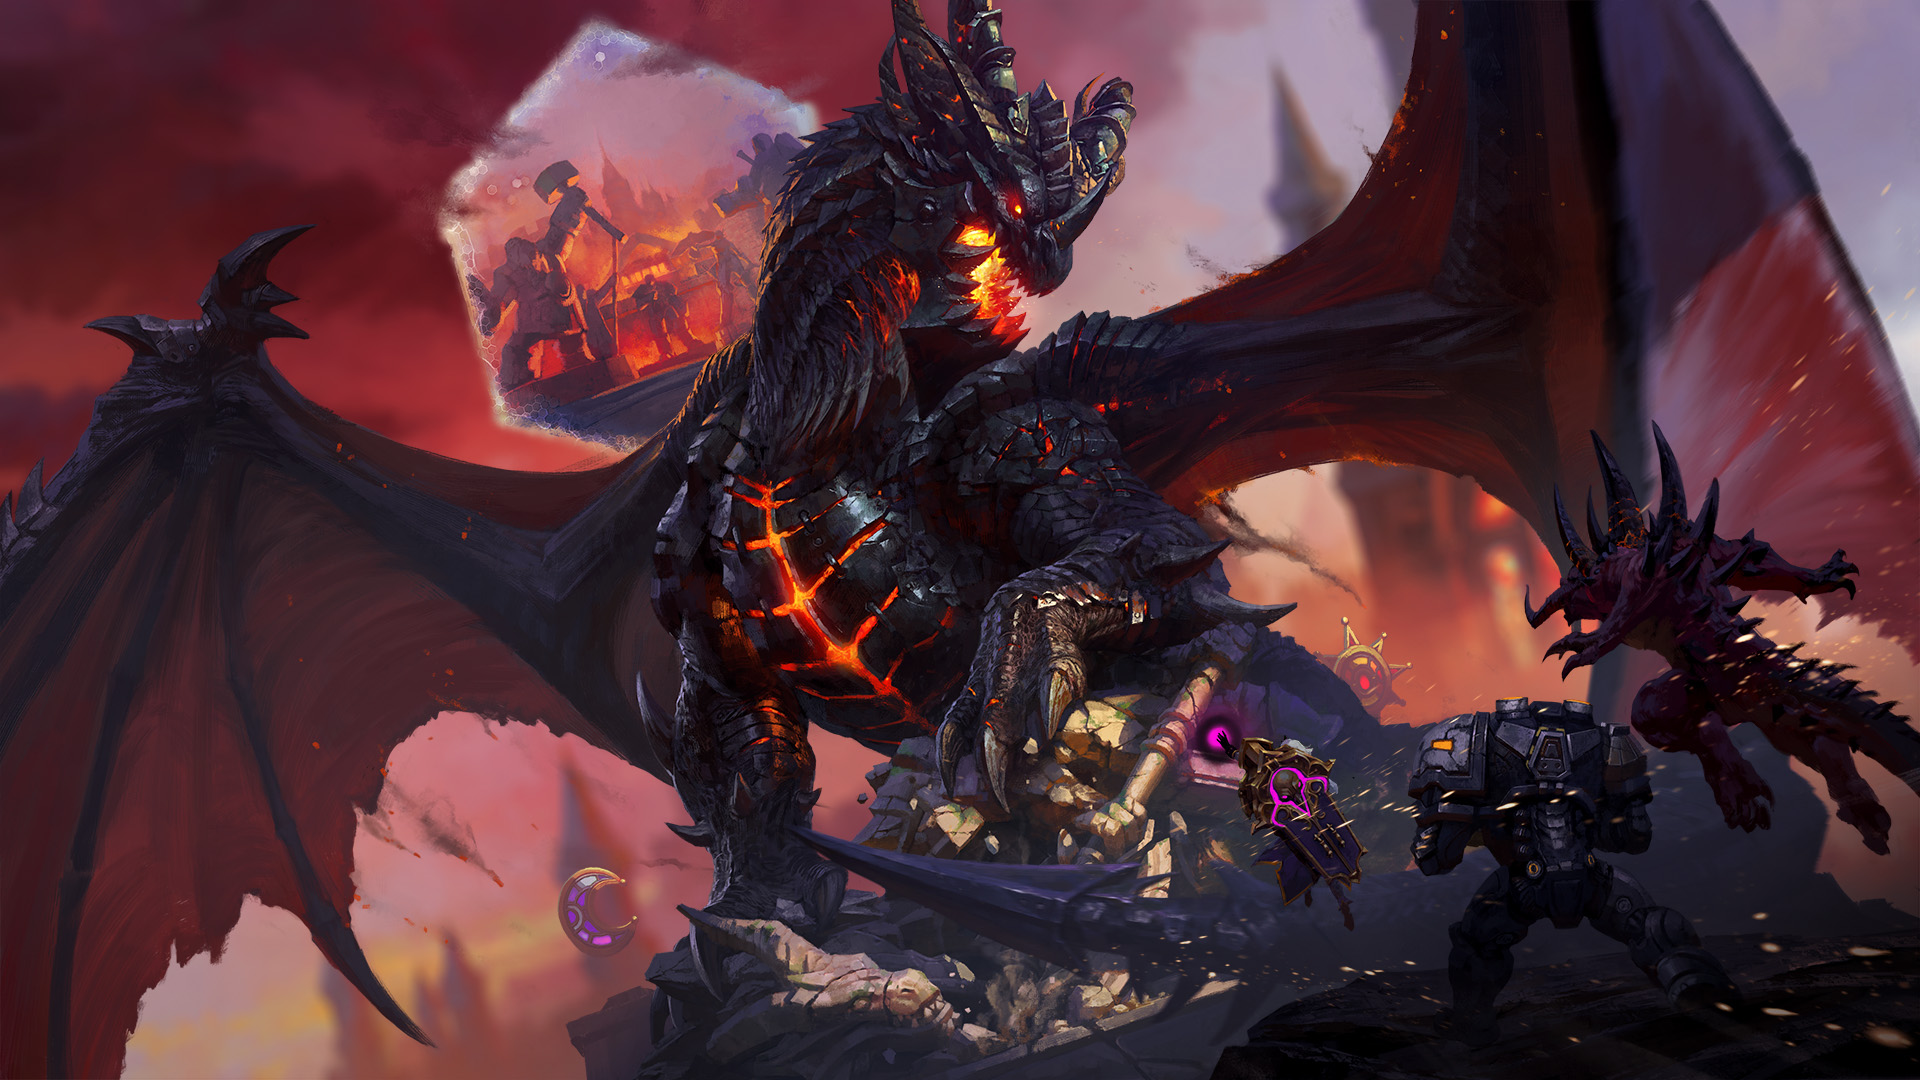 Image of Deathwing, a massive black dragon with tattered wings and fiery eyes engaged in battle. The dragon's body is covered in black scales and his mouth is open, revealing sharp teeth. His claws and tail are in motion, suggesting a fierce attack.